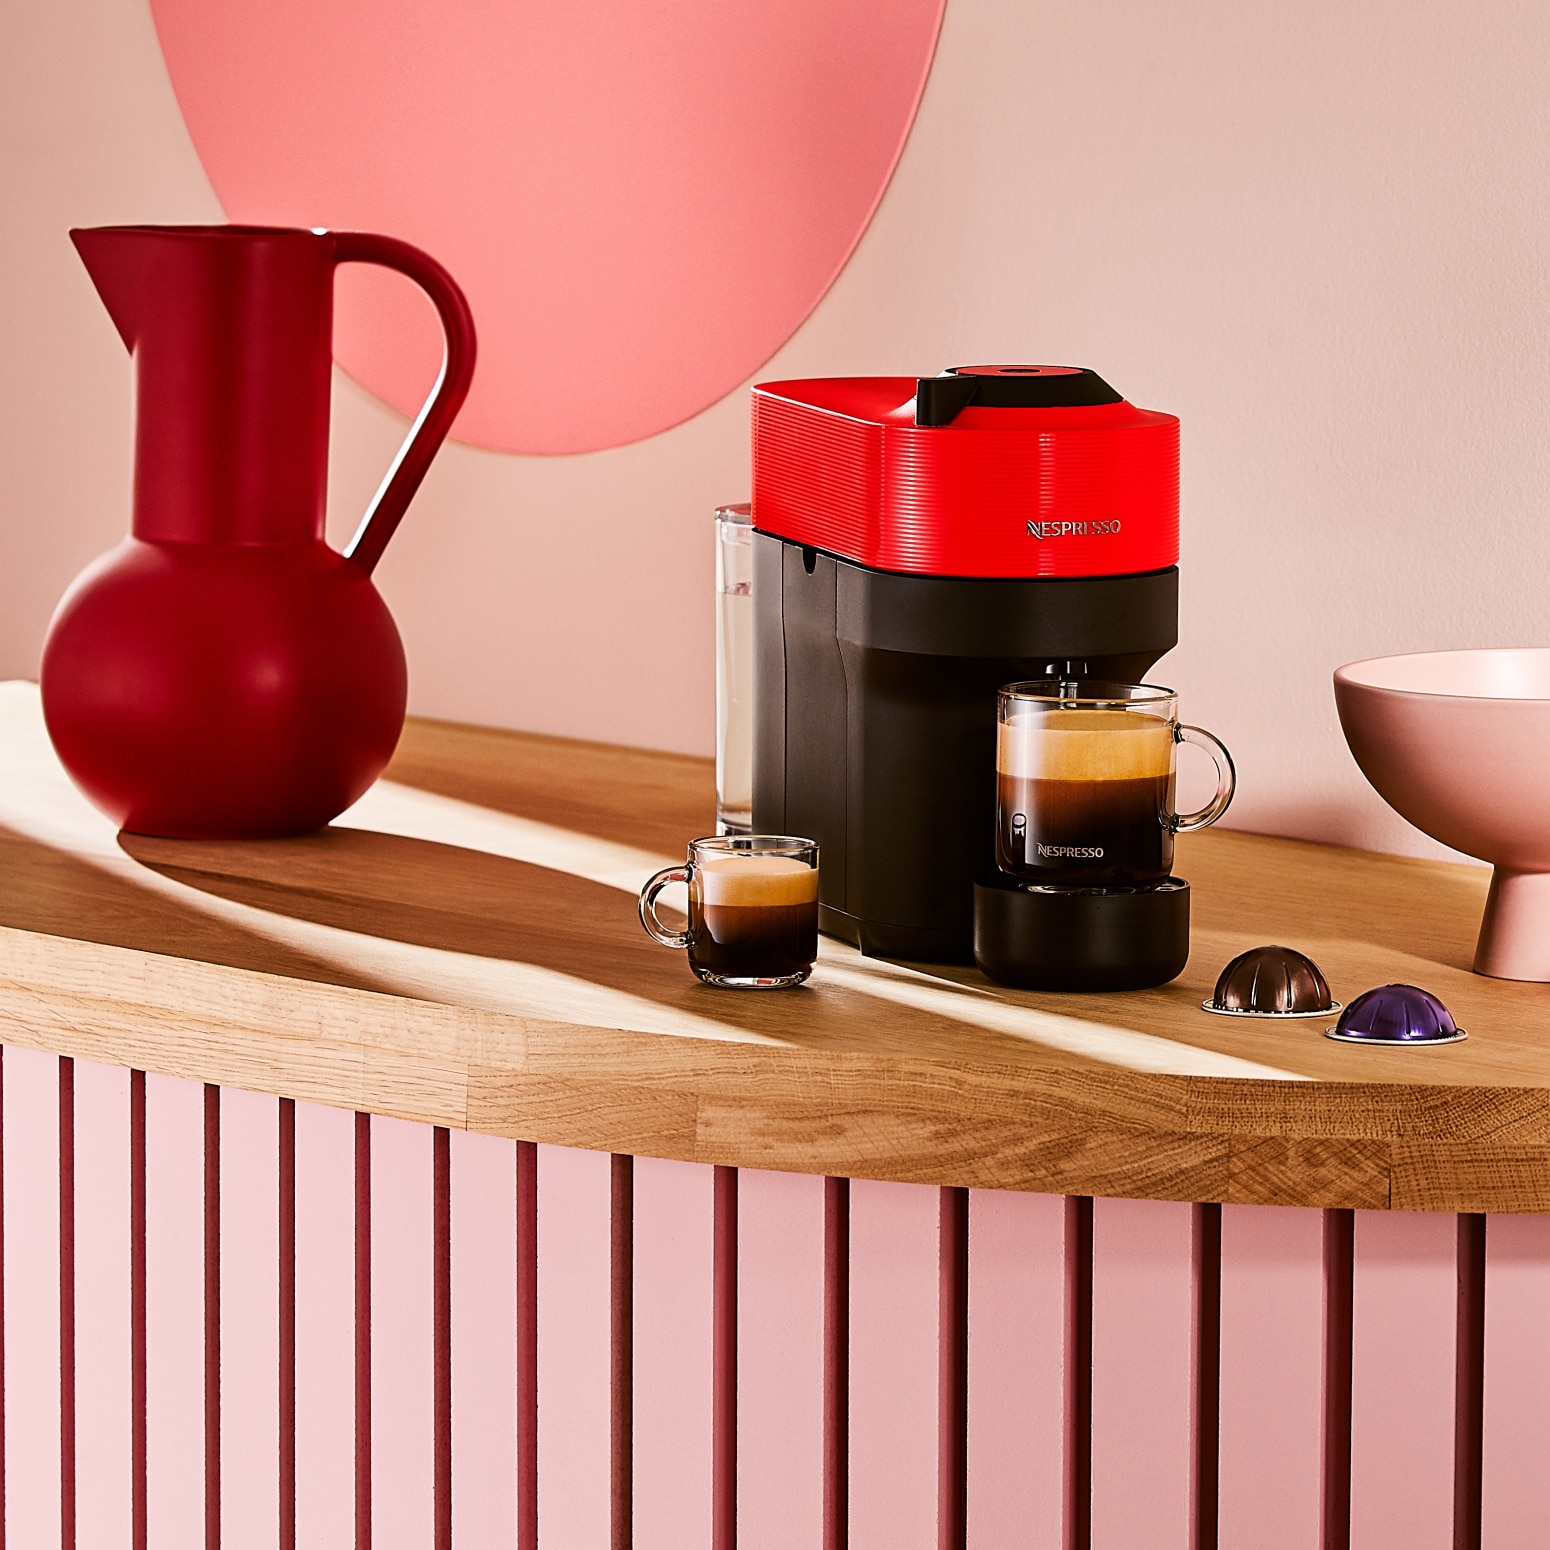 https://www.nespresso.com/shared_res/agility/global/machines/vl/gallery-image/vertuo-pop_red_kitchen_2x.jpg